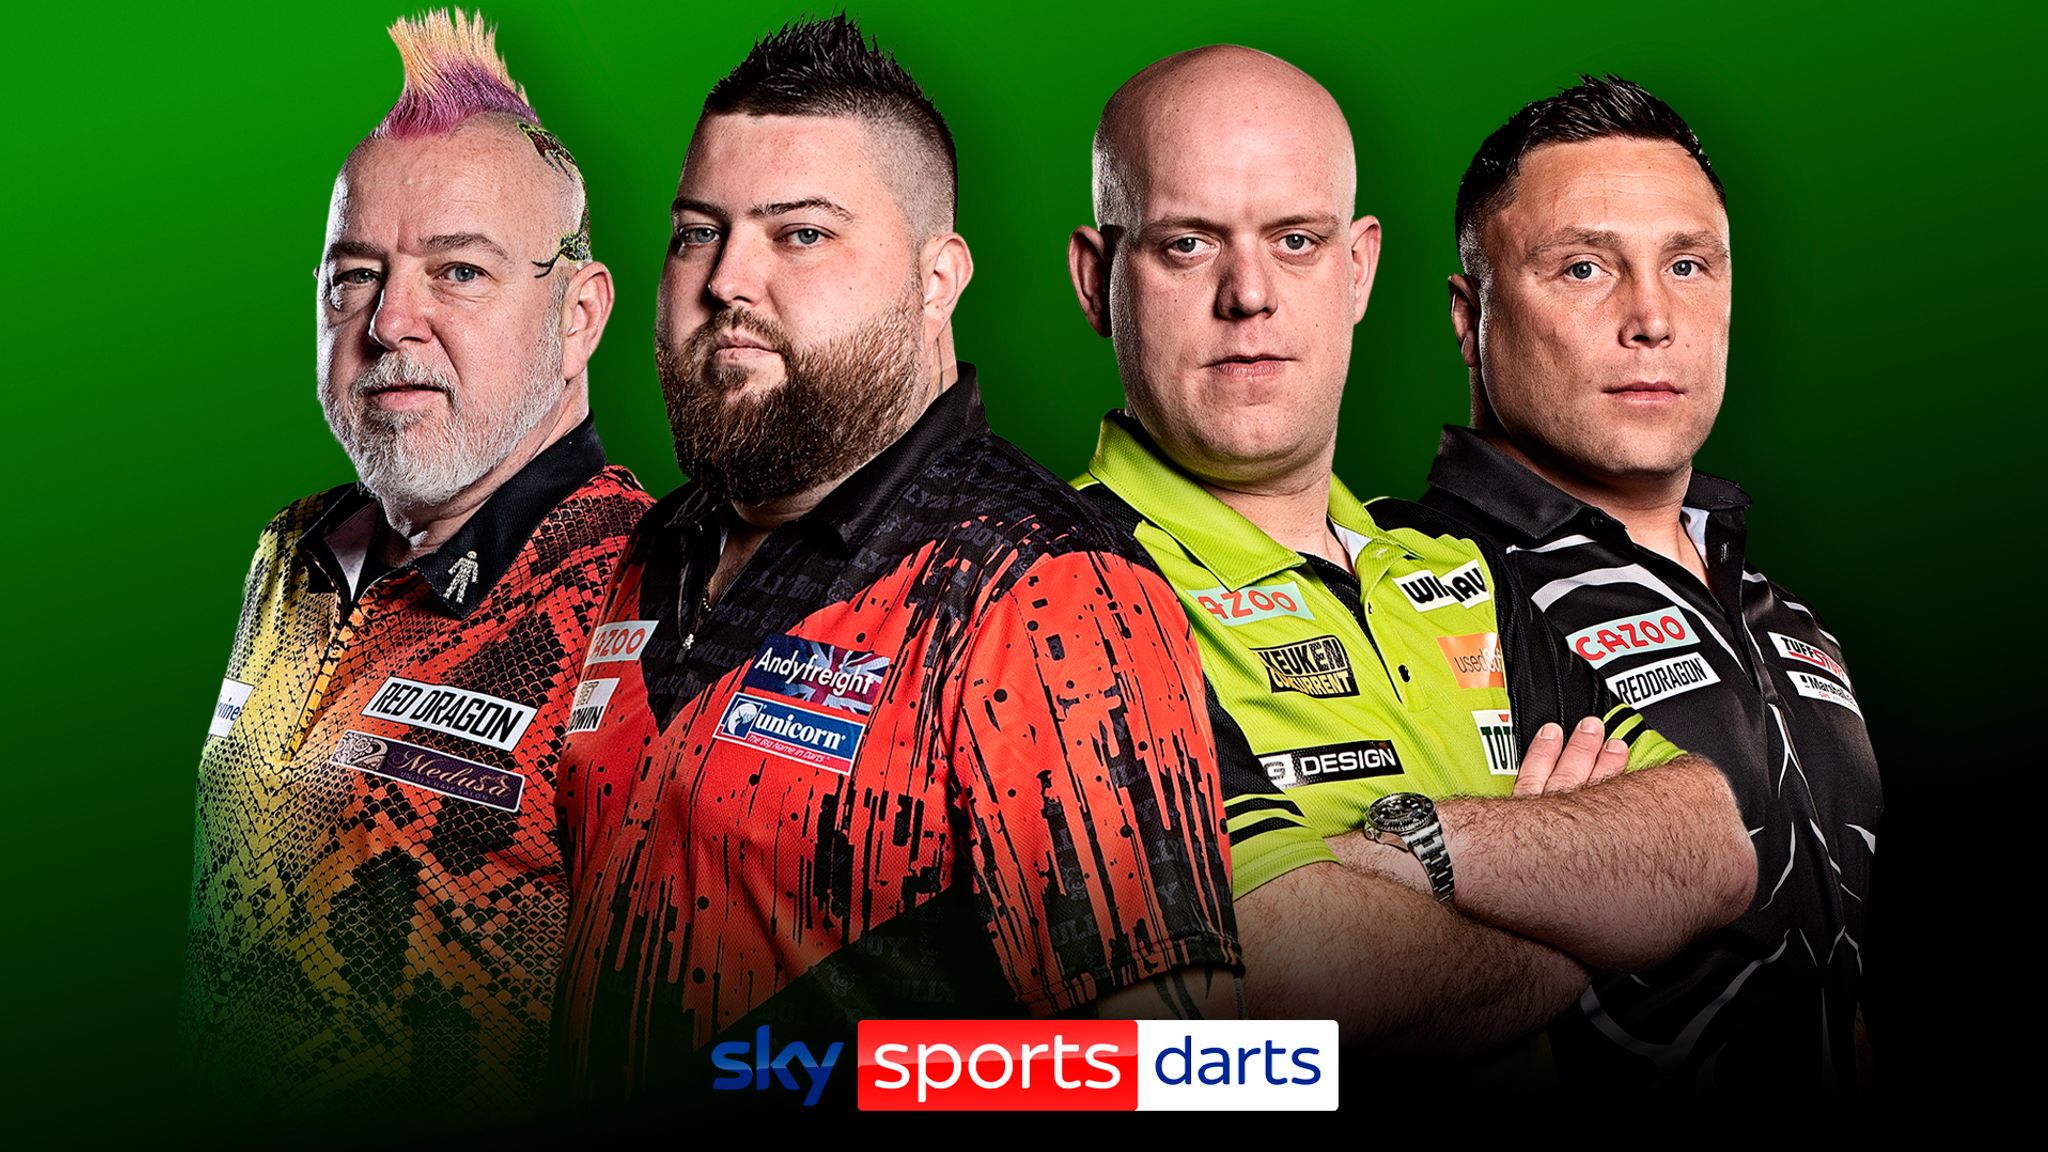 Premier League Darts schedule, results and TV times: Michael Smith, Michael van Gerwen, Gerwyn Price and Peter Wright star | News Sky Sports